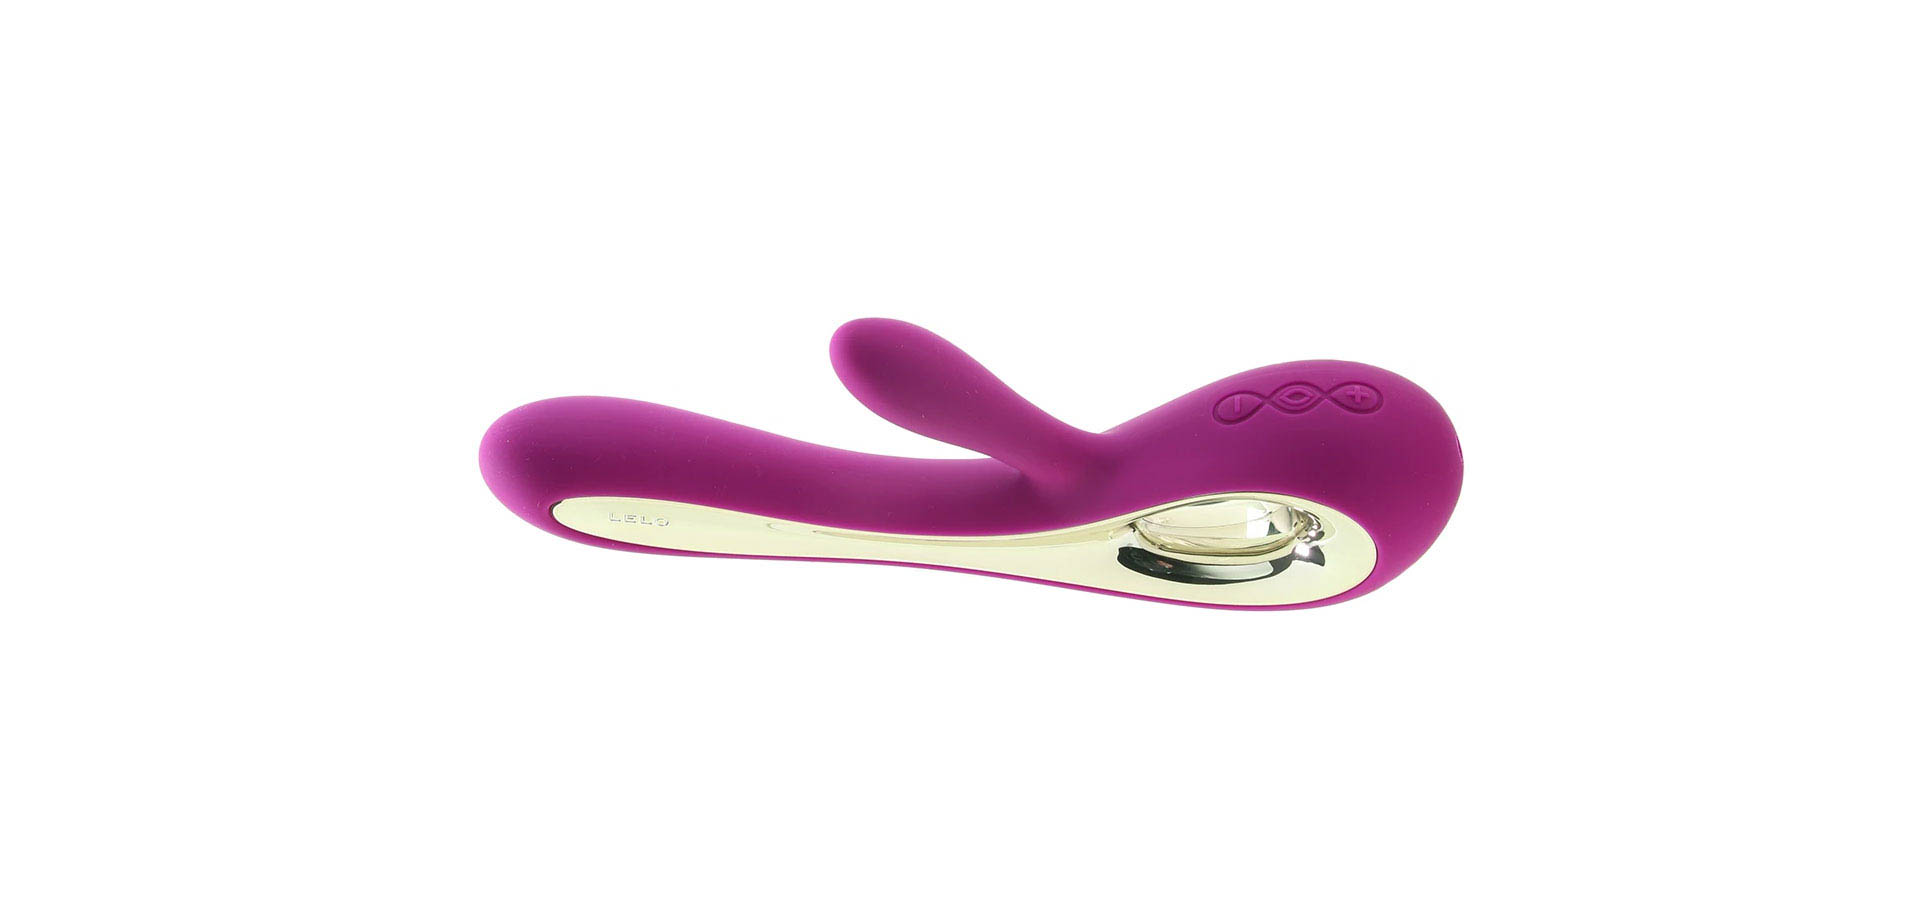 G-Spot and Clitoral Luxury Vibrator.